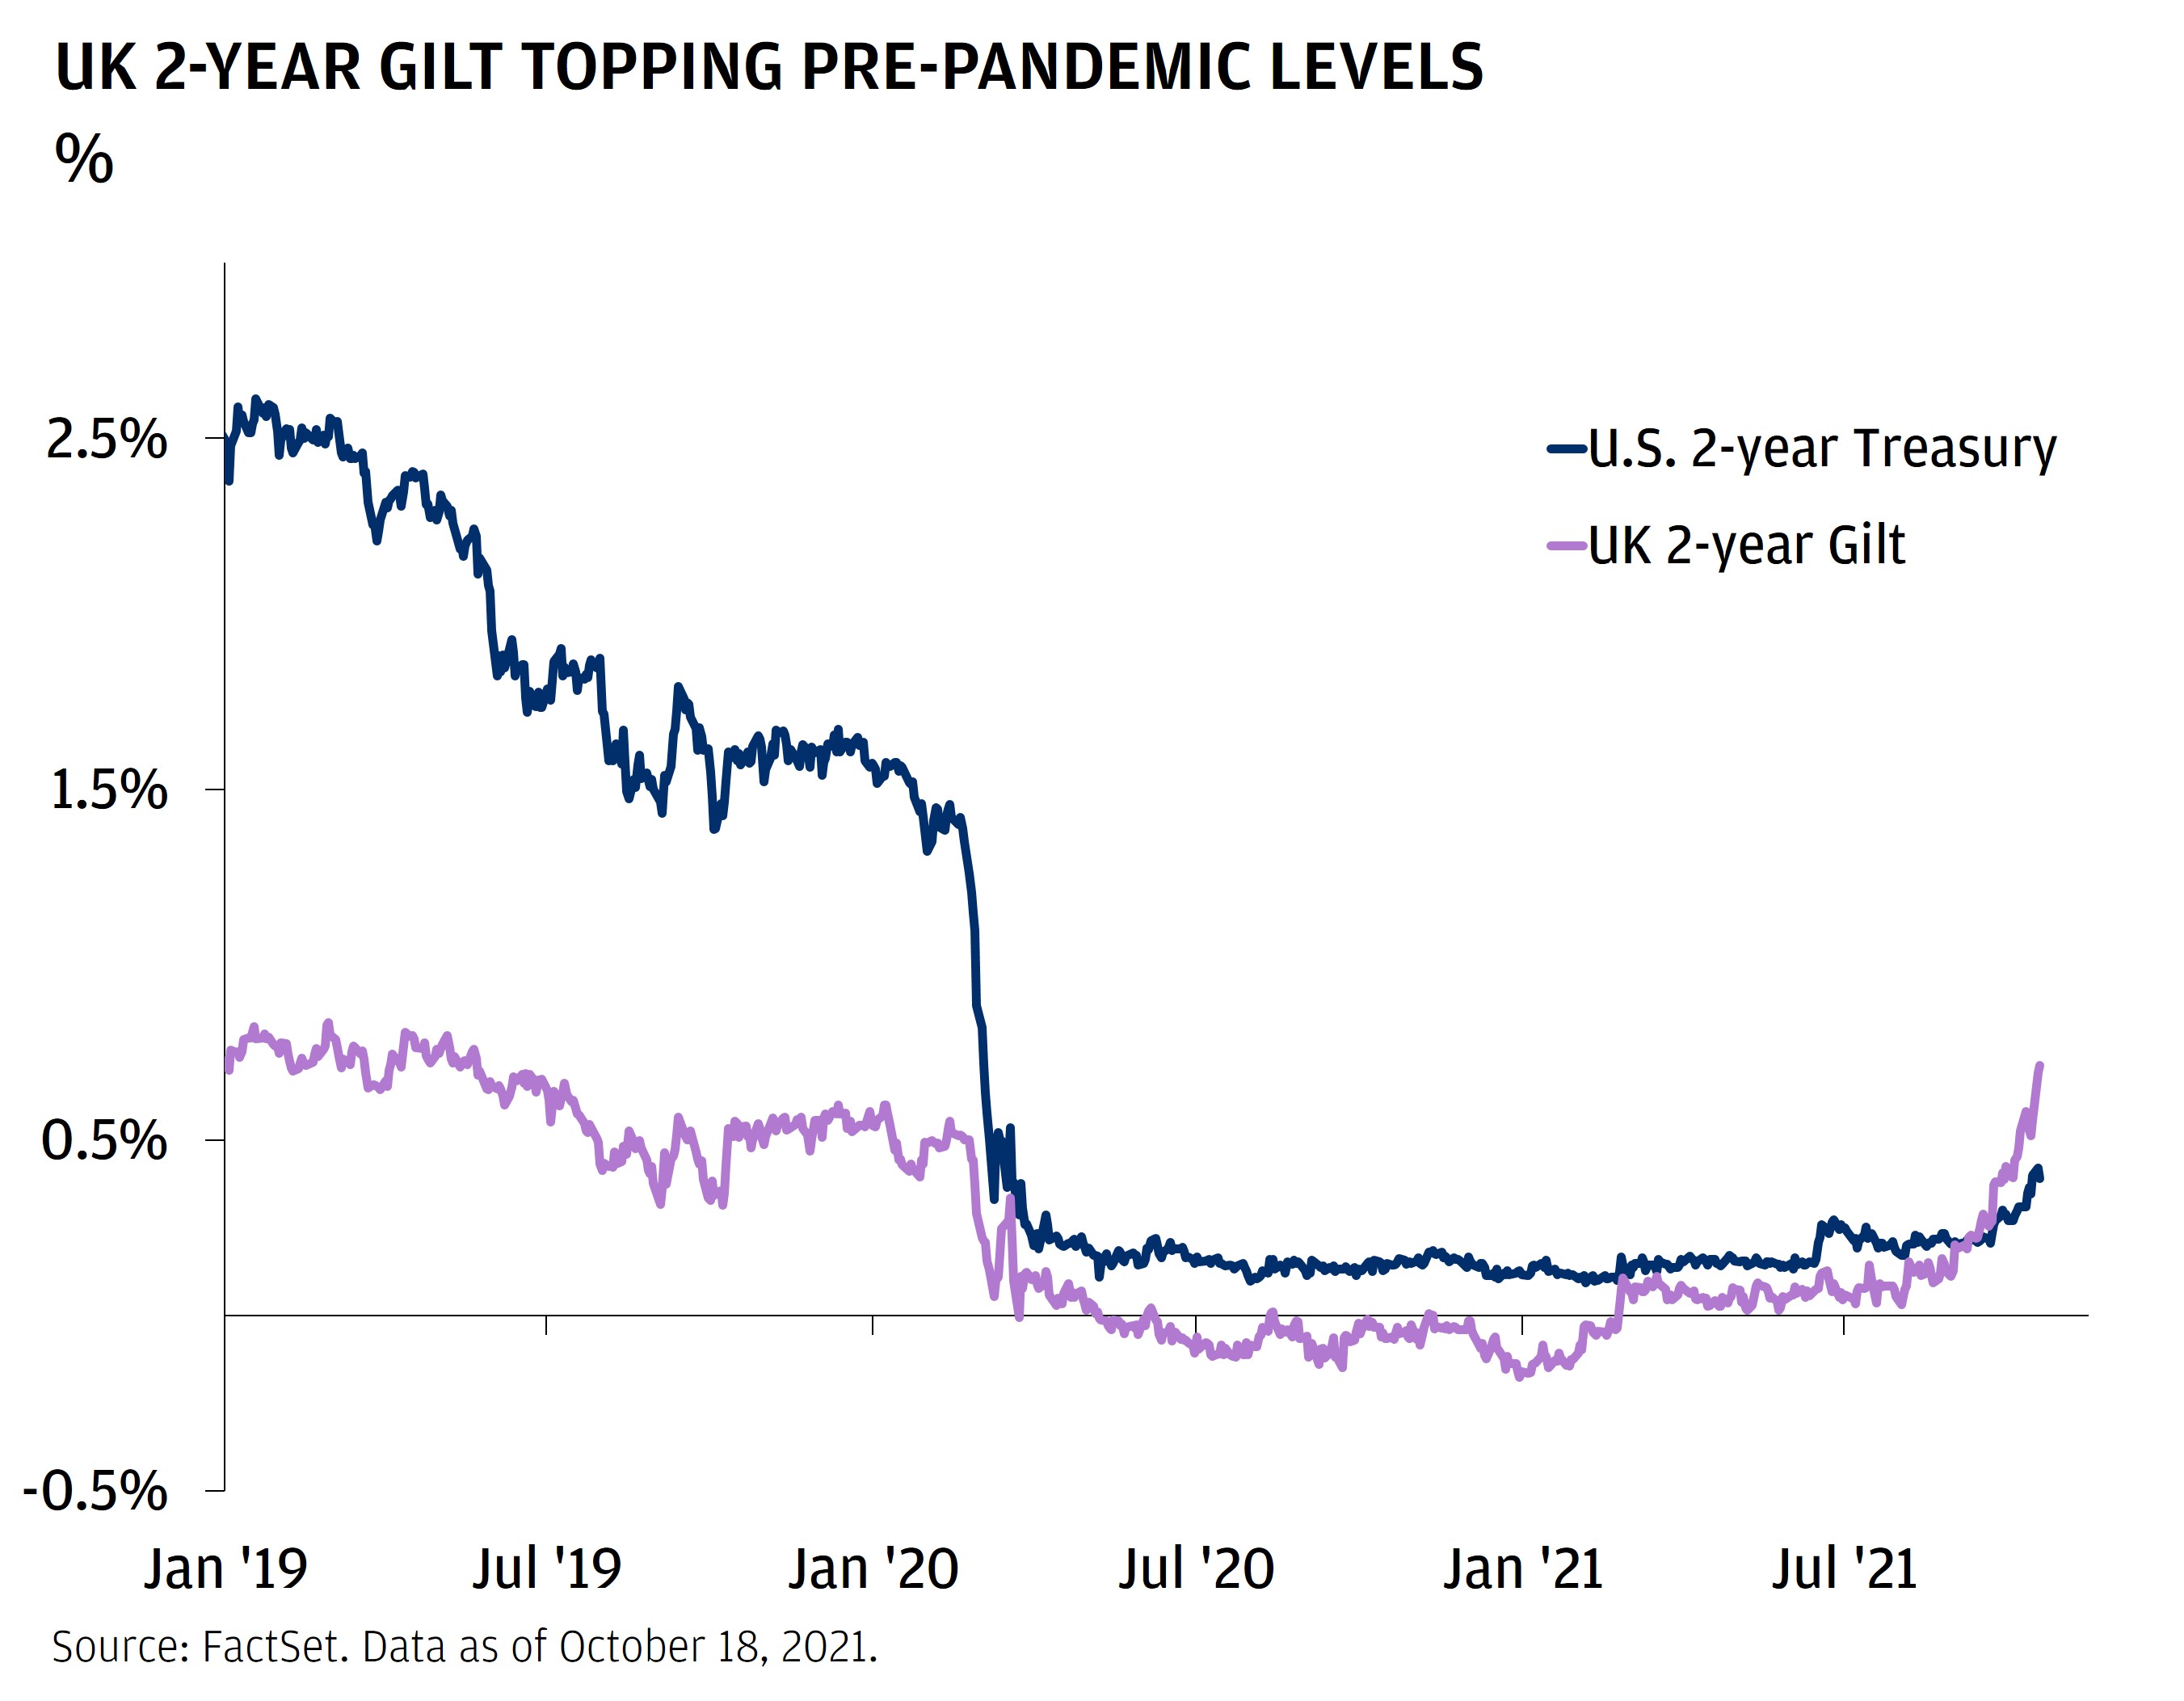 This chart shows the U.S. 2-year Treasury yield and UK 2-year Gilt from January 2019 to mid-October 2021. In early 2019, the U.S. 2-year Treasury yield measured 2.4%. It slightly climbed from there yet began its ascent at an absolute high of 2.6% in mid-January 2019. It then fell to 1.4% by August 2019. Meanwhile, the UK 2-year Gilt began at 0.7%, falling at a shallower rate to hit 0.4% by August 2019. Both rates hovered respectively prior to mid-February 2020. At this point, the U.S. 2-year had a dramatic nosedive to 0.4% by mid-March 2020. The UK 2-year also fell, but much less dramatically, reaching 0.05% at the same time. The U.S. 2-year kept falling to an absolute low of 0.1% in May 2020, whereas the UK 2-year fell into the negatives, hitting an absolute low of -0.2% by the end of 2020. The U.S. 2-year stayed near that level until mid-June 2021 when it felt a slight increase to 0.2%. The UK 2-year felt this slight pop a bit earlier, reaching 0.08% in early March 2021.   For the U.S. 2-year, from June 2021, it hovered near 0.2% until the end of September when it began a modest ascent. As of late, it marks 0.4%. For the UK 2-year, from March 2021, it hovered near 0.08% until early August when it began a steeper ascent than the U.S.. As of late, it tops the U.S. and marks 0.7%.